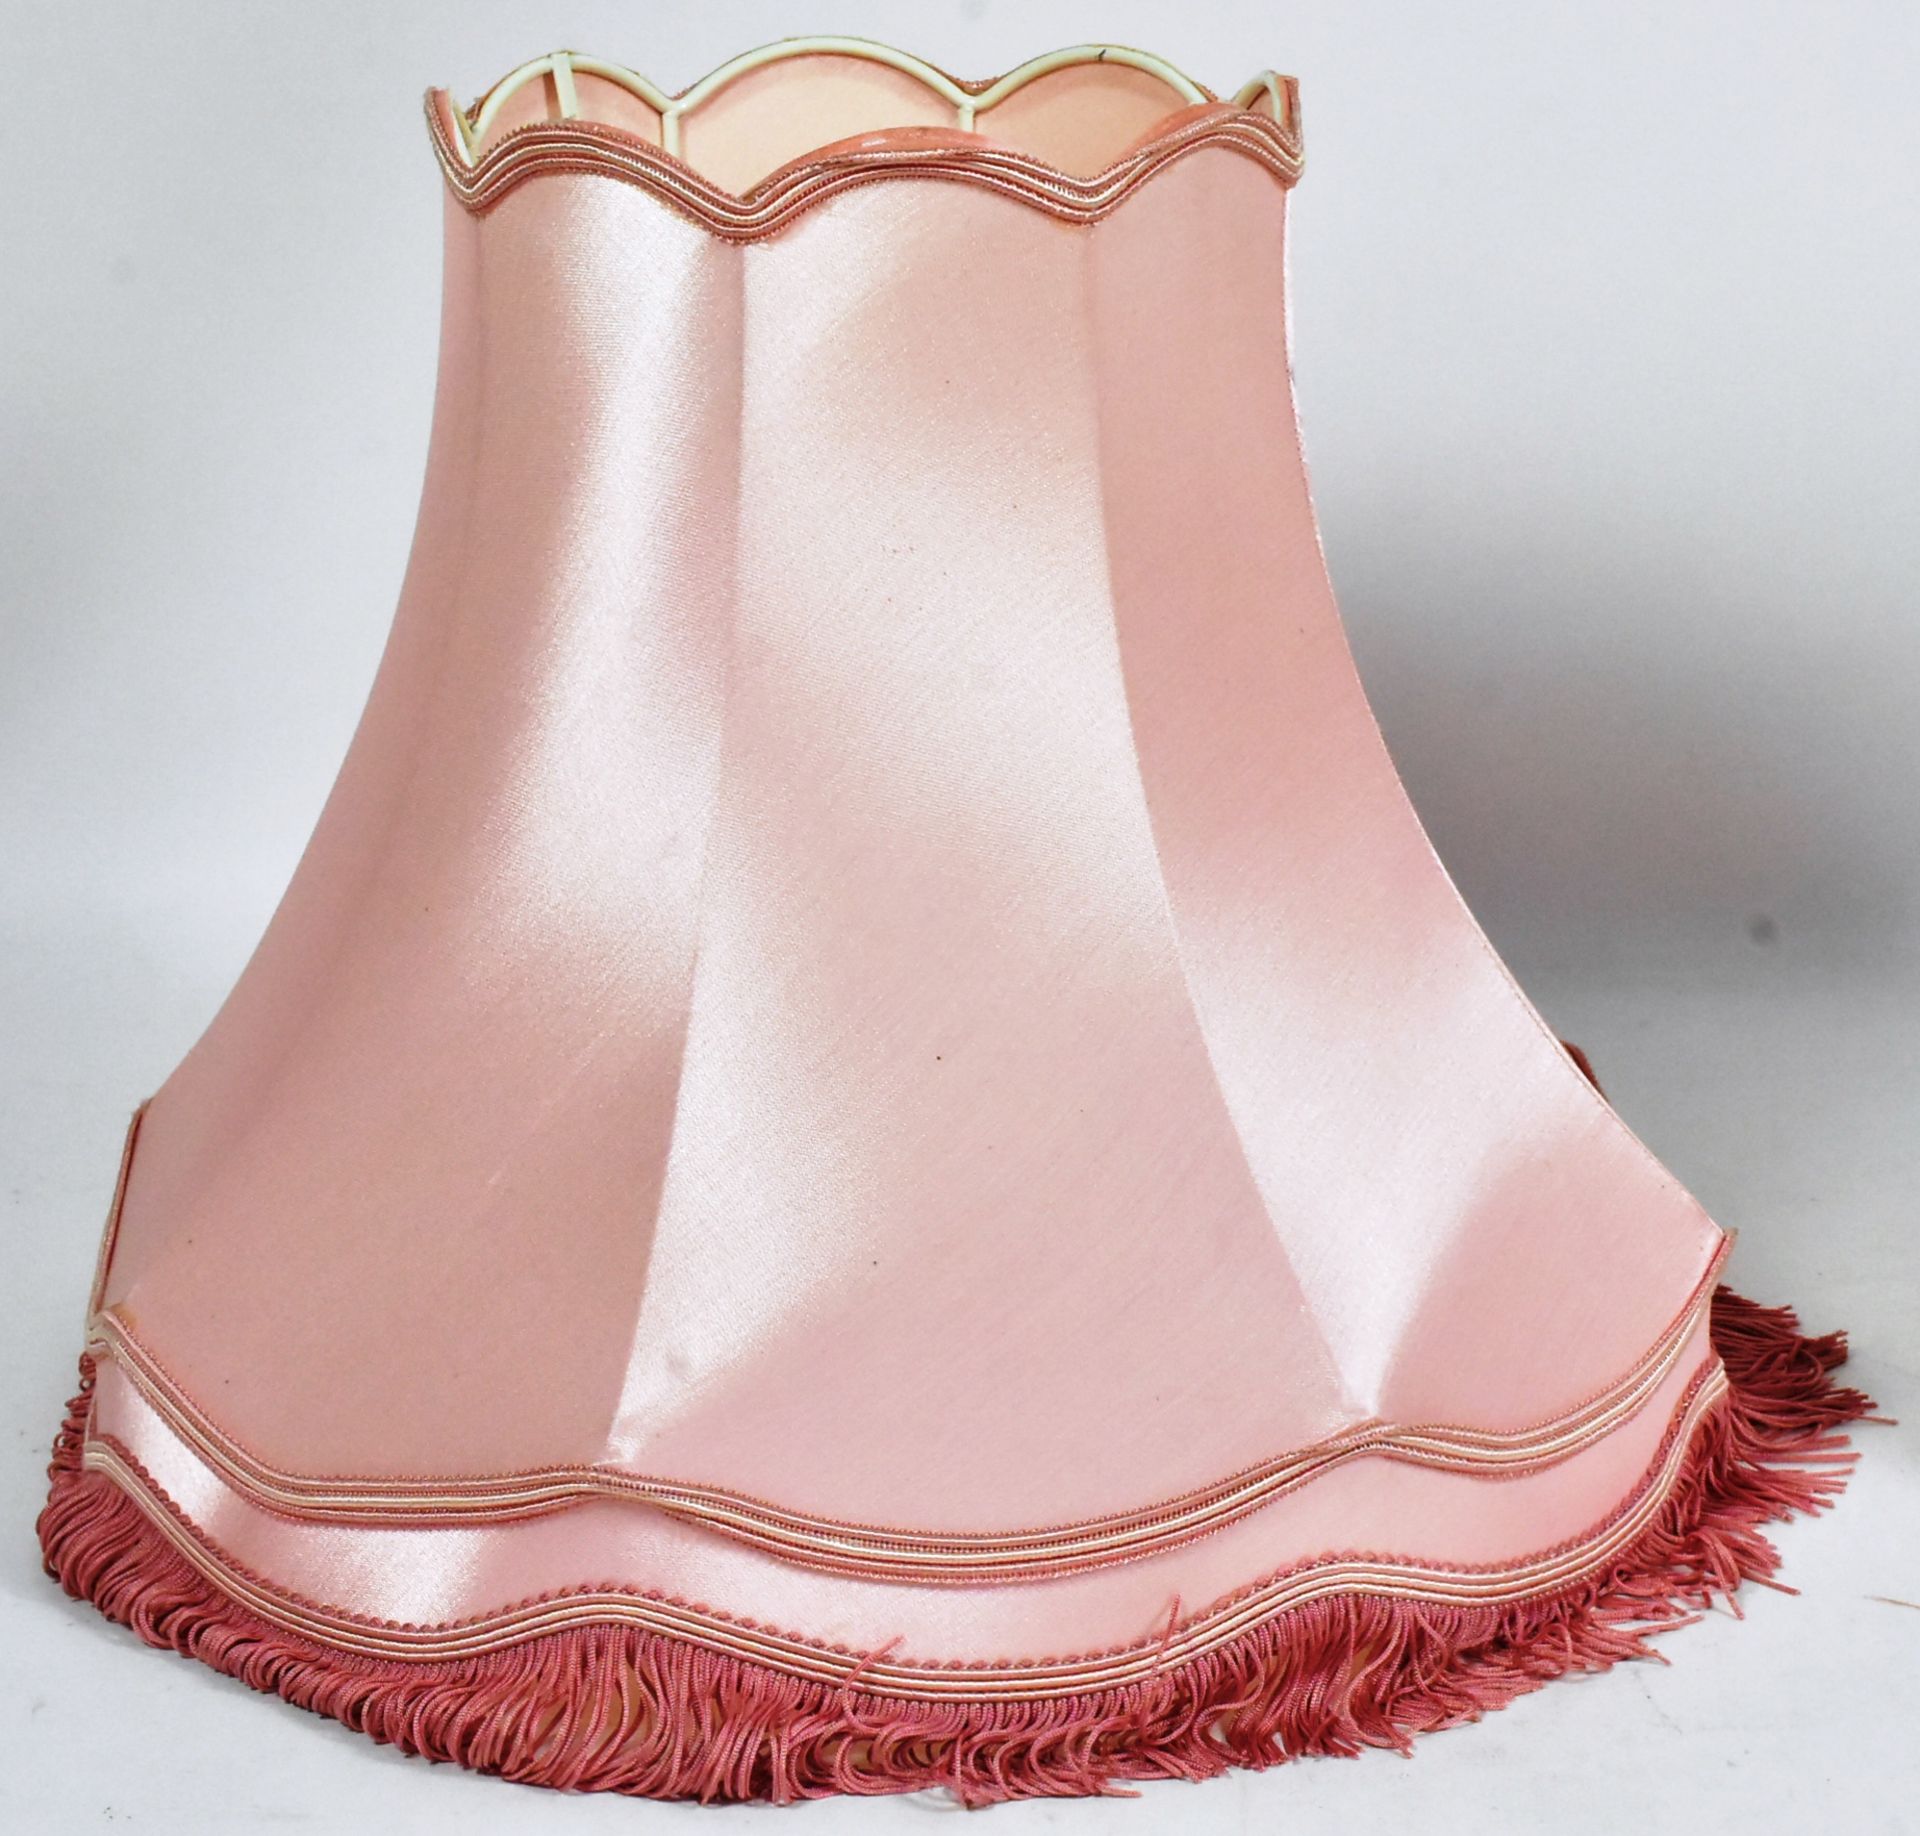 TWO LARGE VINTAGE PINK LAMP SHADES - Image 4 of 6